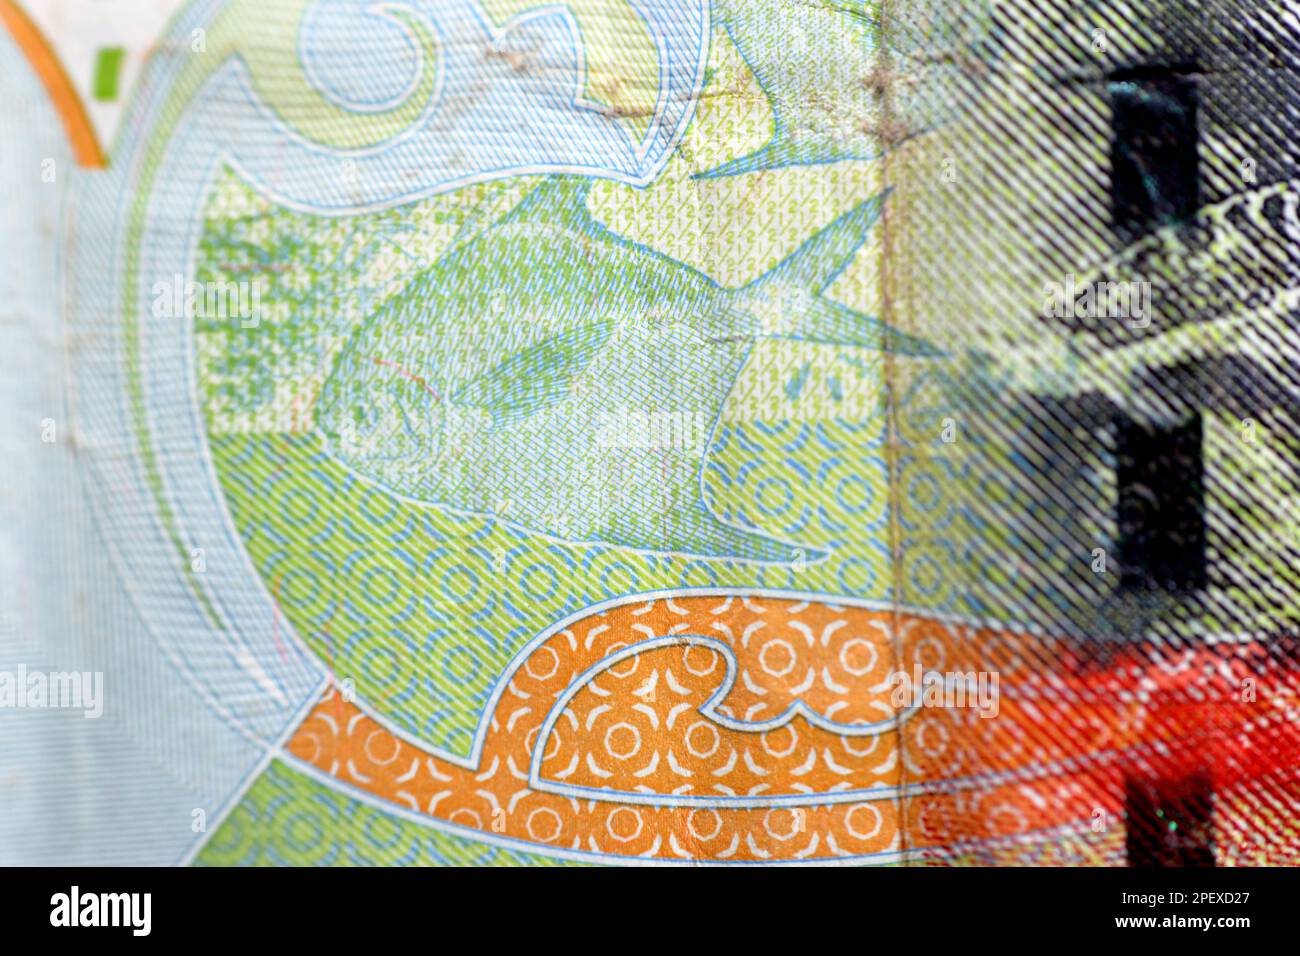 The silver Pomfret fish (Al Zubadi) closeup from the reverse side of Kuwaiti half dinar green paper banknote cash money bill currency  issued 2014 whi Stock Photo